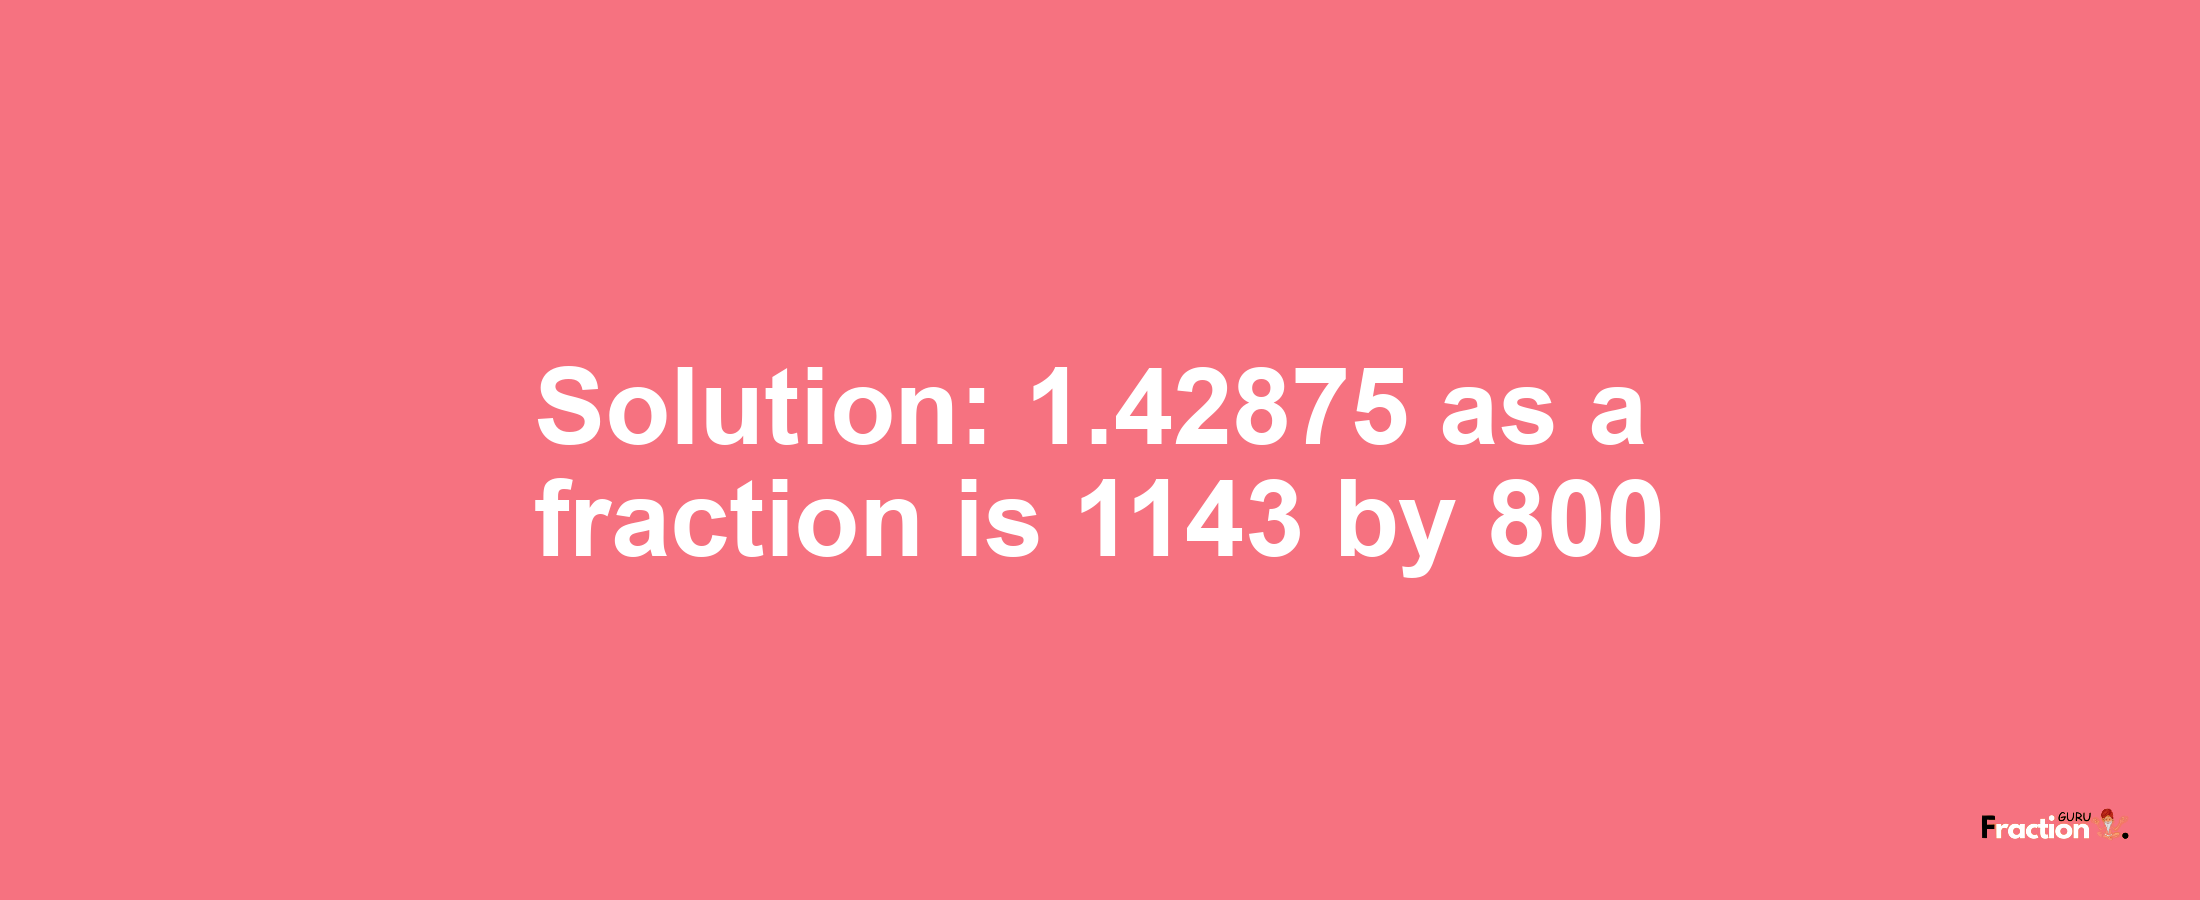 Solution:1.42875 as a fraction is 1143/800